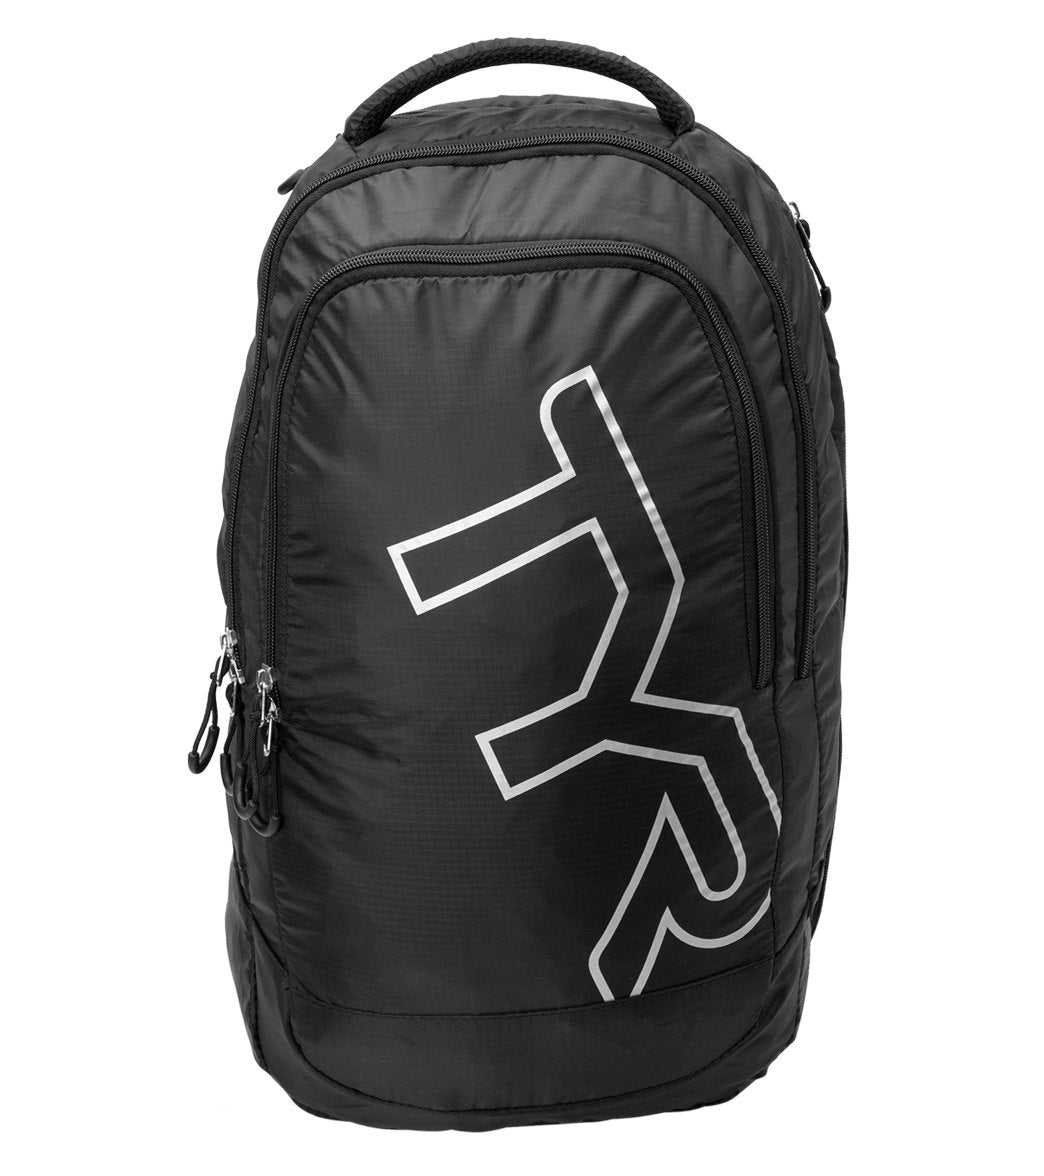 TYR Victory Backpack at SwimOutlet.com